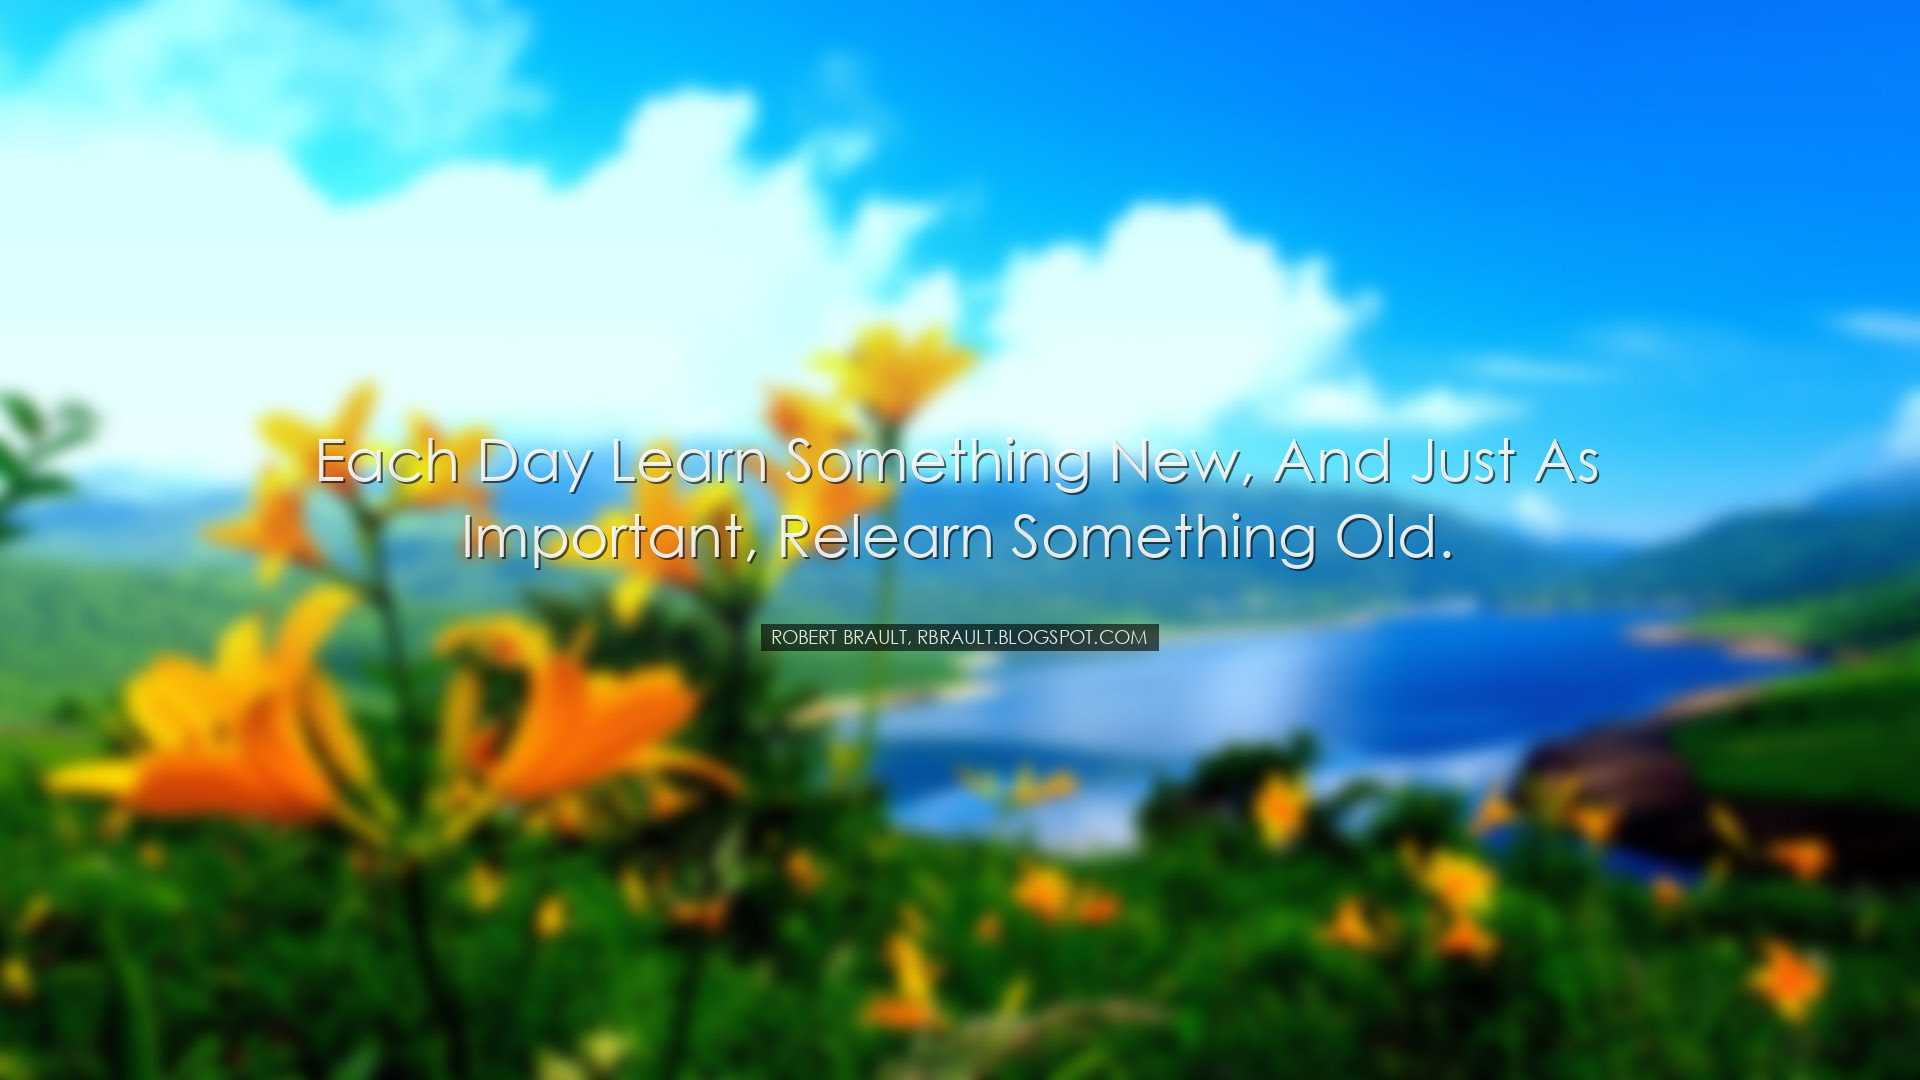 Each day learn something new, and just as important, relearn somet